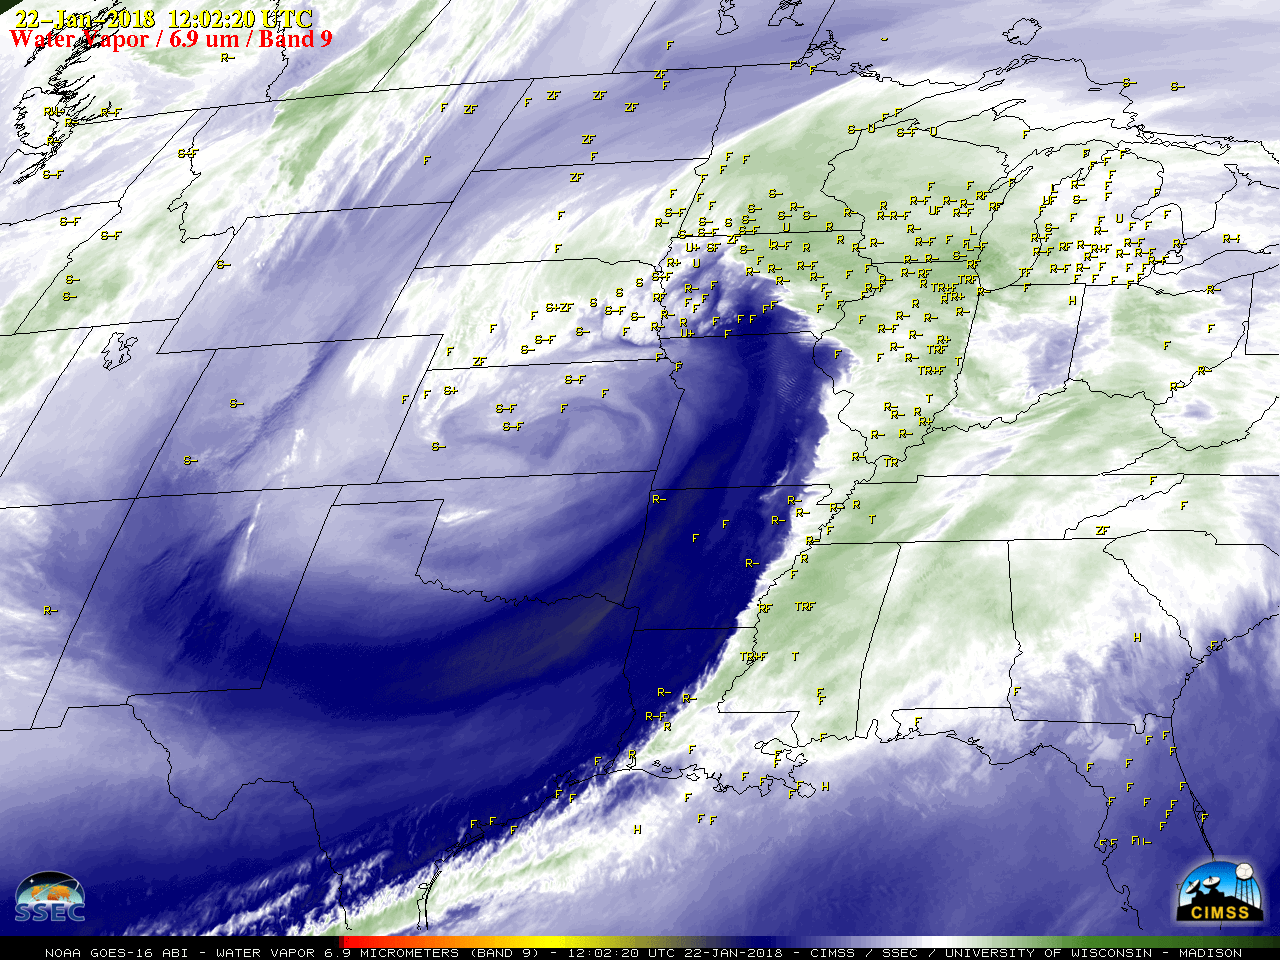 GOES-16 Water Vapor (6.9 µm) images, with hourly precipitation type plotted in yellow [click to play MP4 animation]